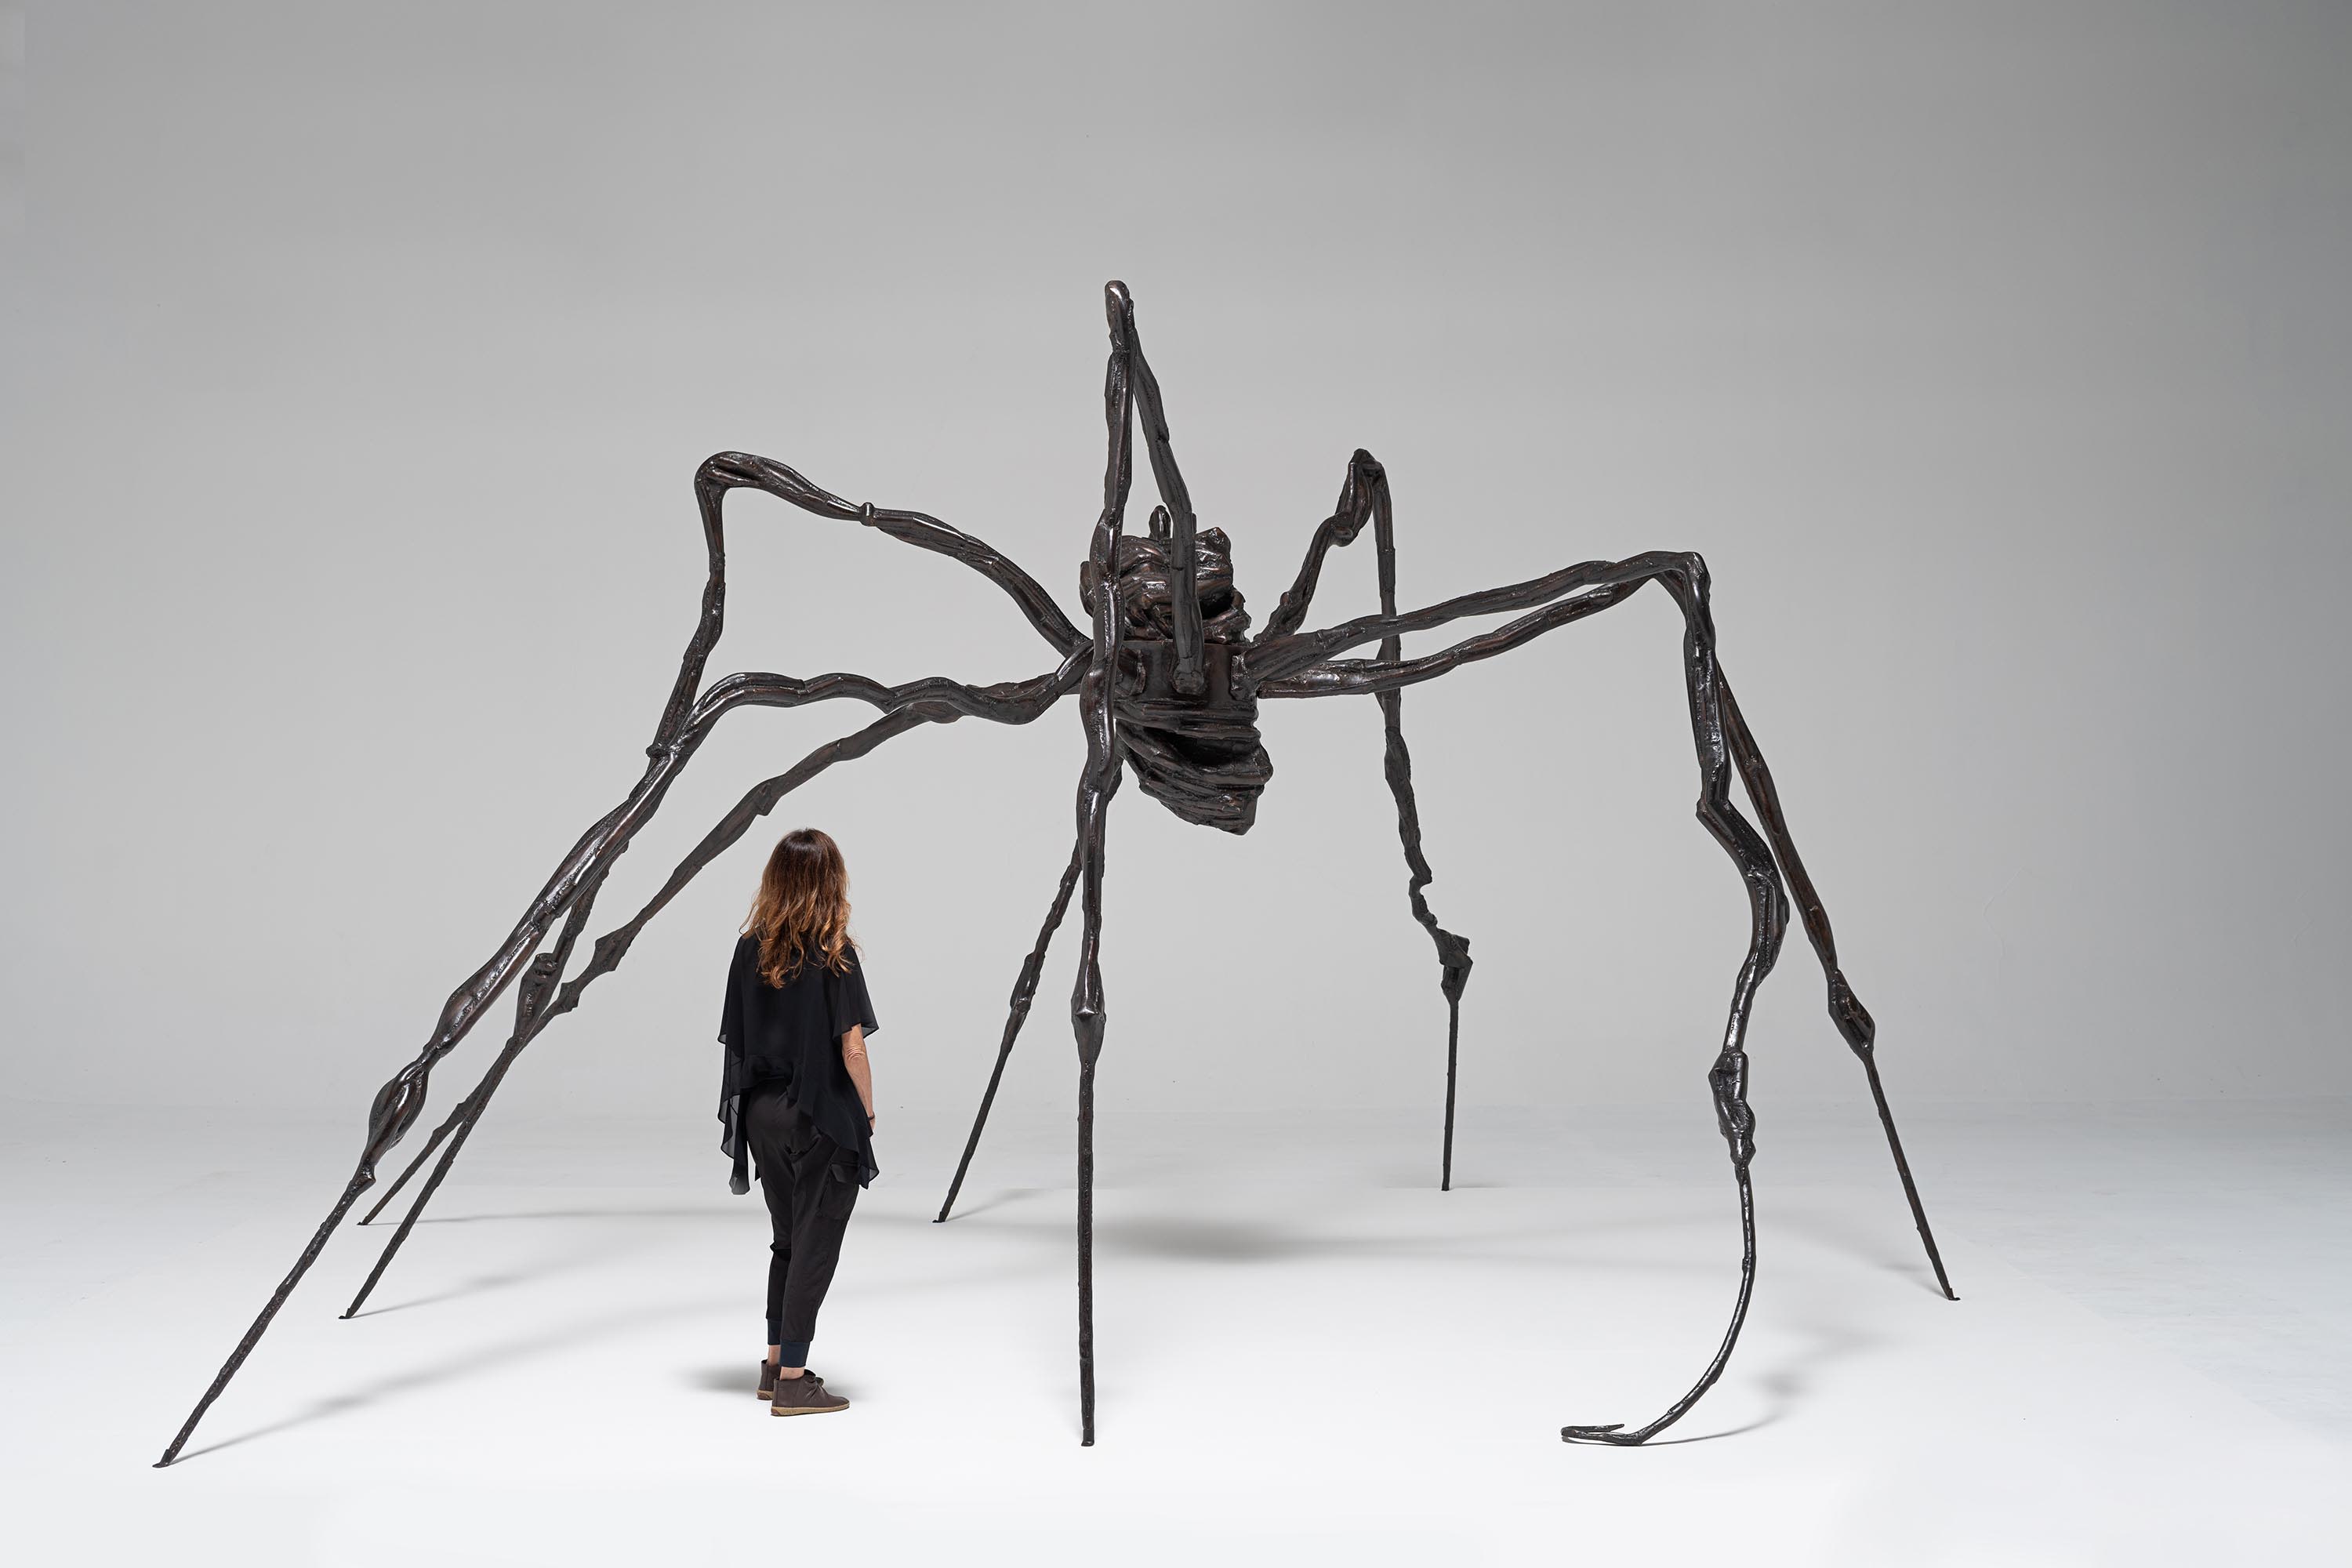 Louise Bourgeois 'Spider' sculpture could fetch $40M at Sotheby's